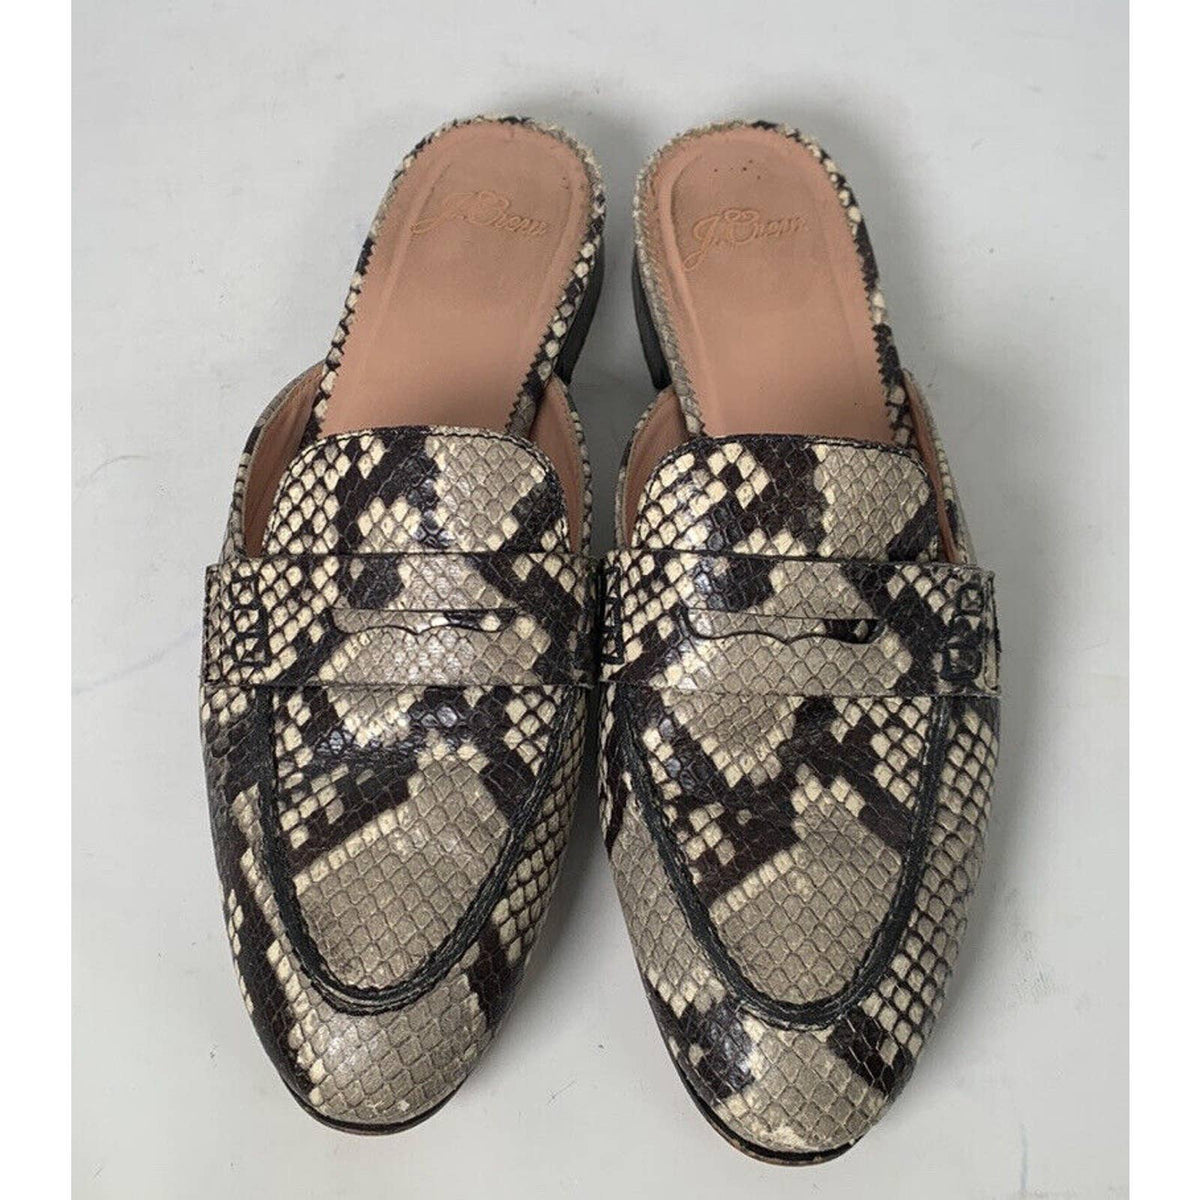 J Crew Academy Embossed Penny Loafers Sz.7